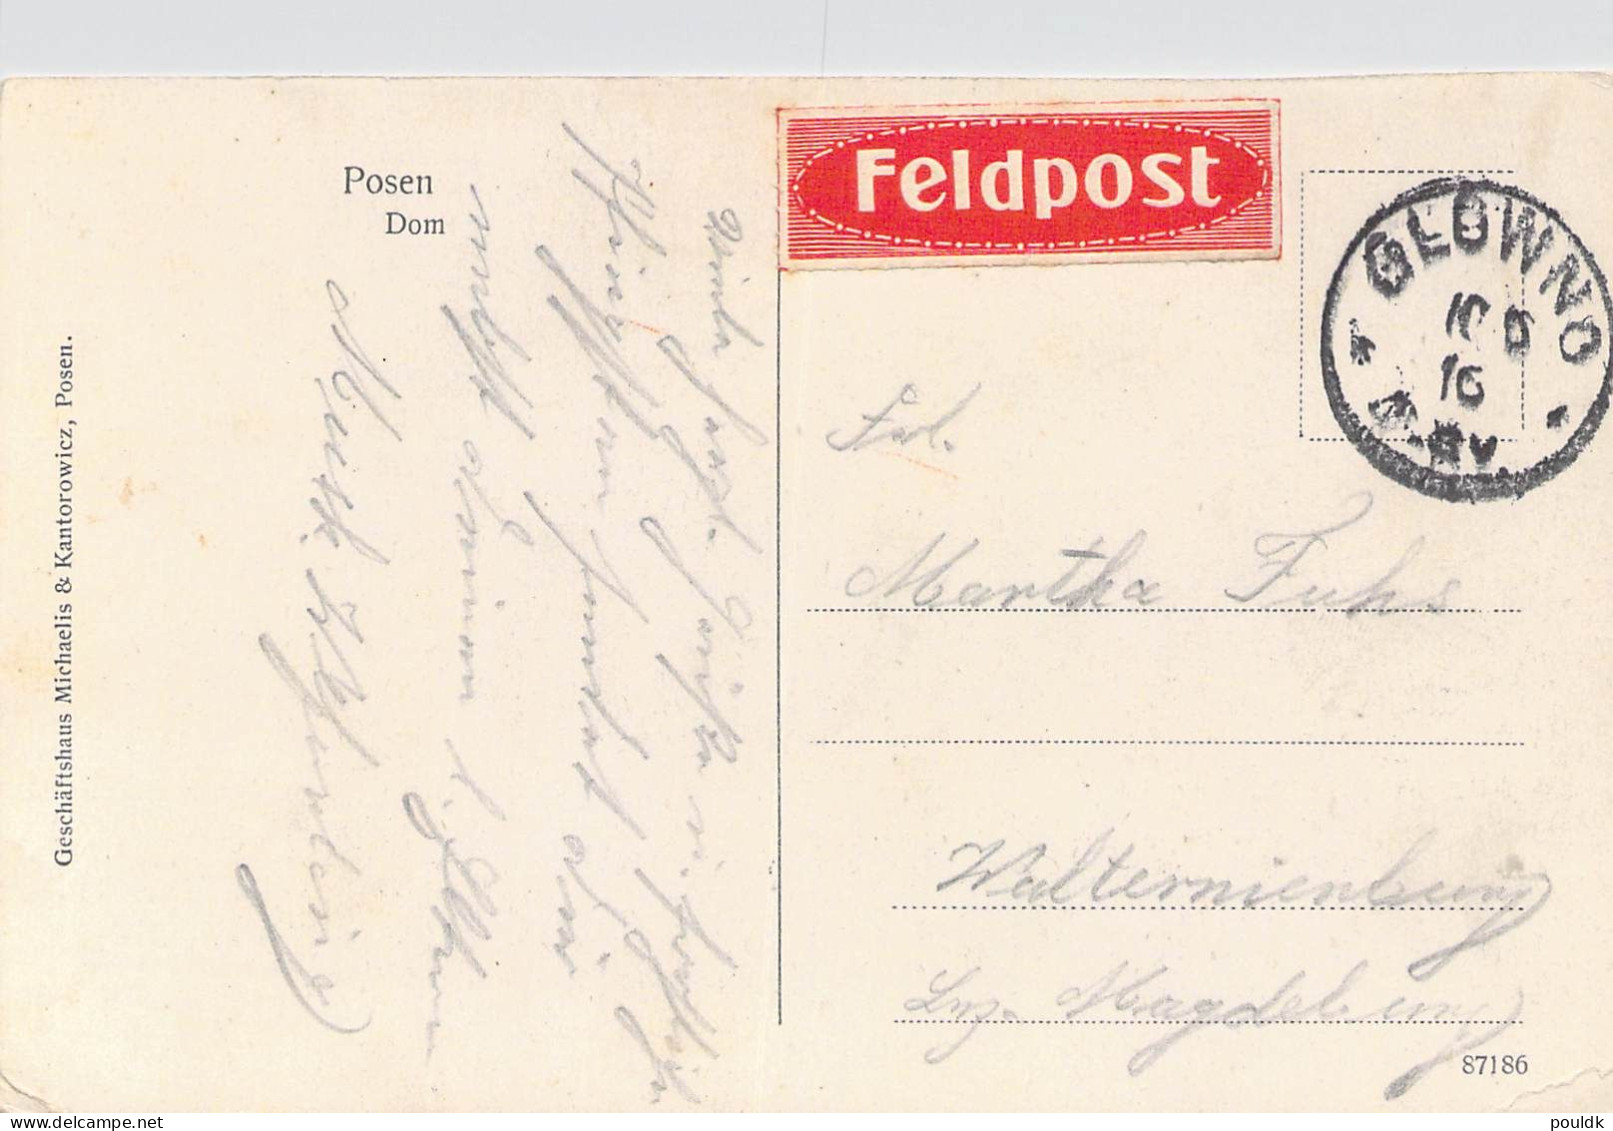 German Feldpost WW1: Postcard Arch Cathedral Basilica Of St. Peter And St. Paul In Posen, Now Poznan (Poland) Posted Fro - Militaria